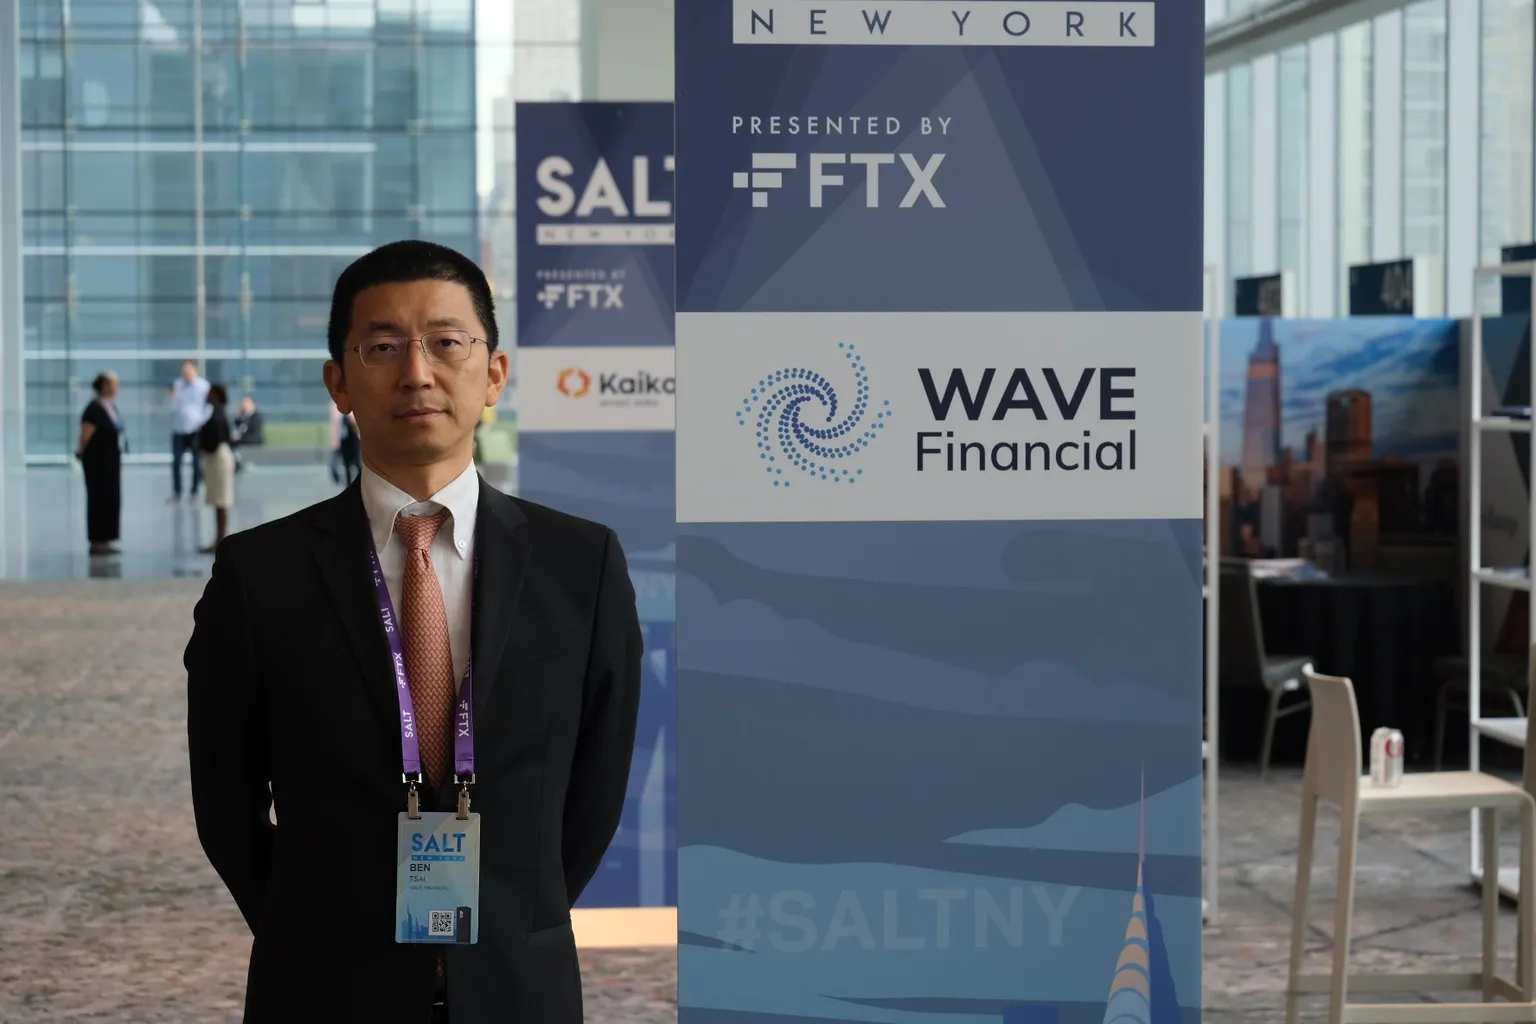 Ben Tsai, president and managing partner at Wave Financial, said institutions are tilting crypto away from retail investors in terms of price discovery.